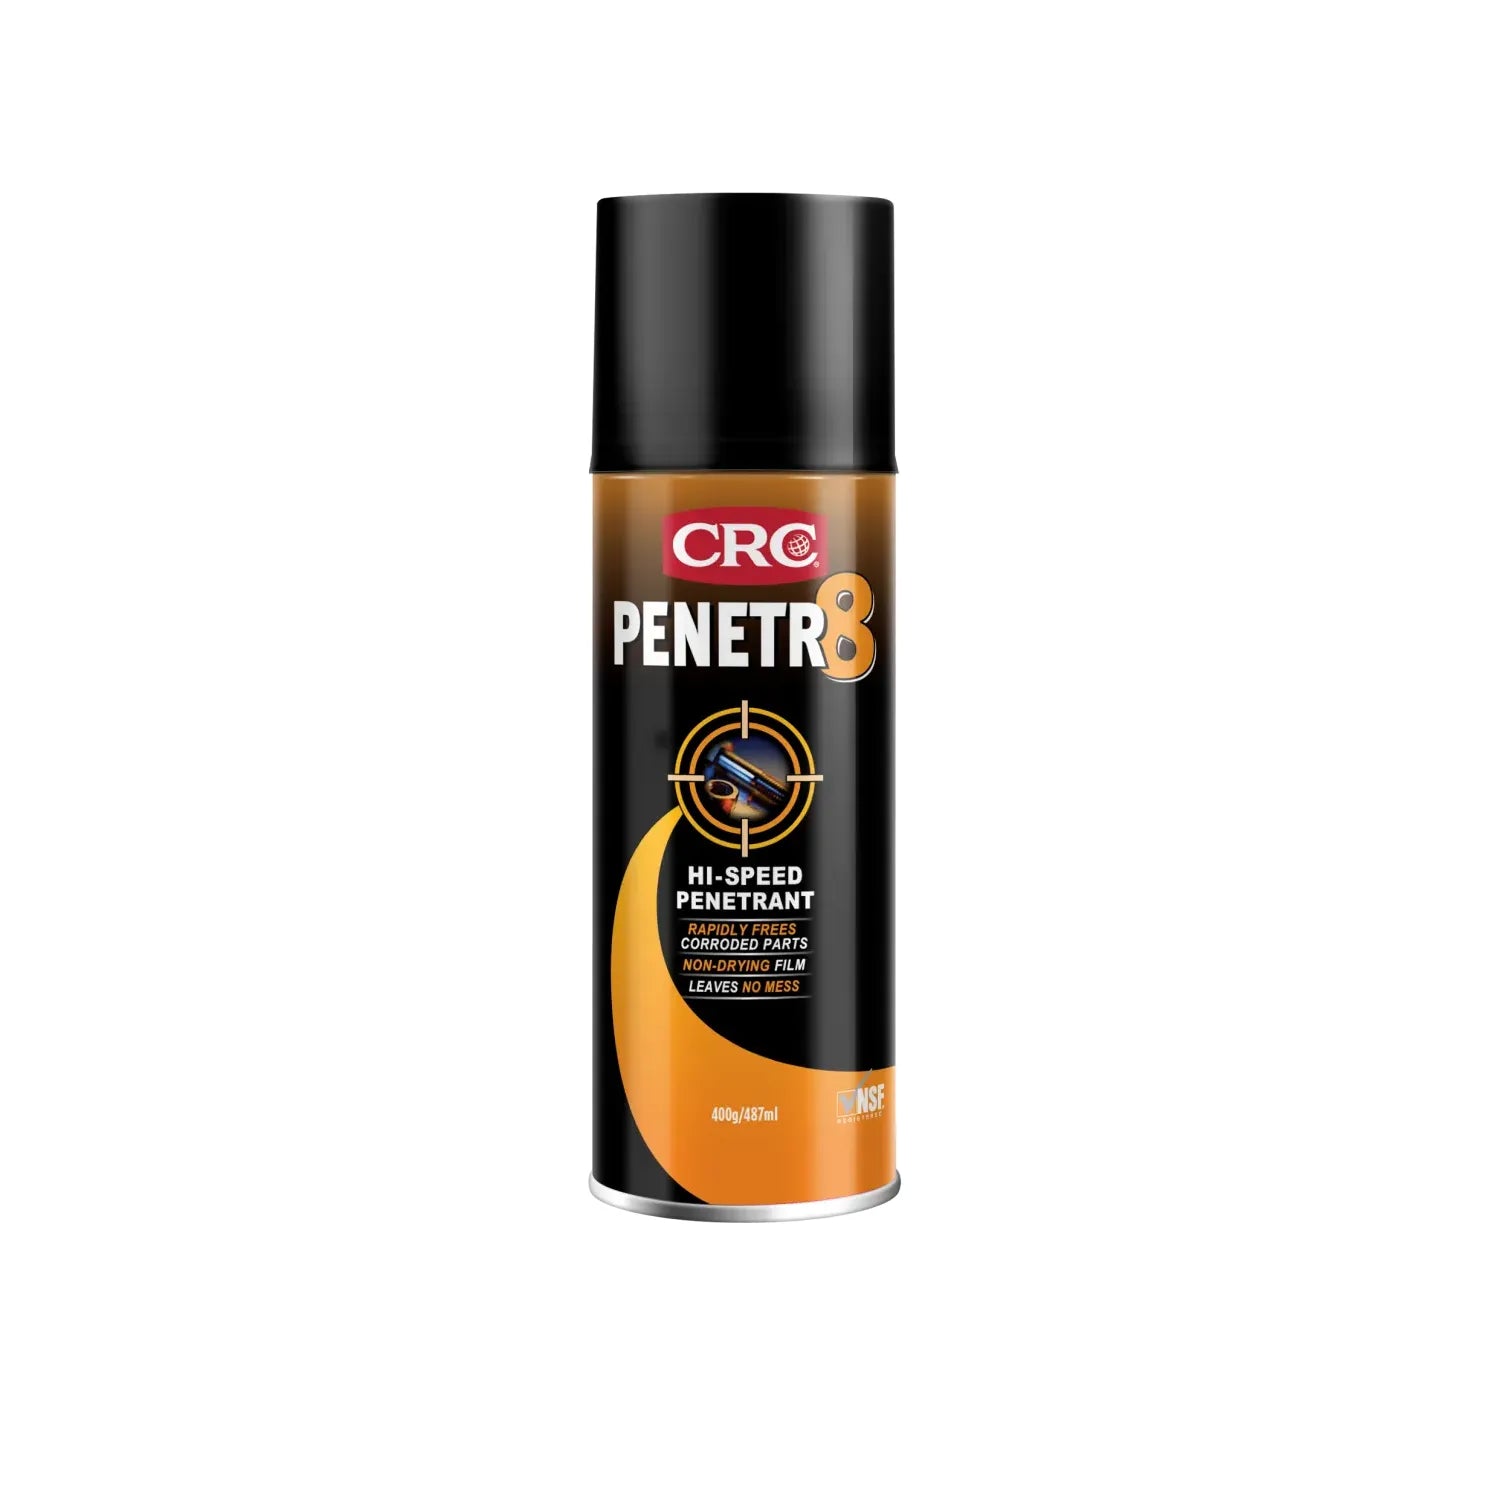 CRC Penetr8 High Speed Penetrant 400g | Product Code : 5501 - South East Clearance Centre